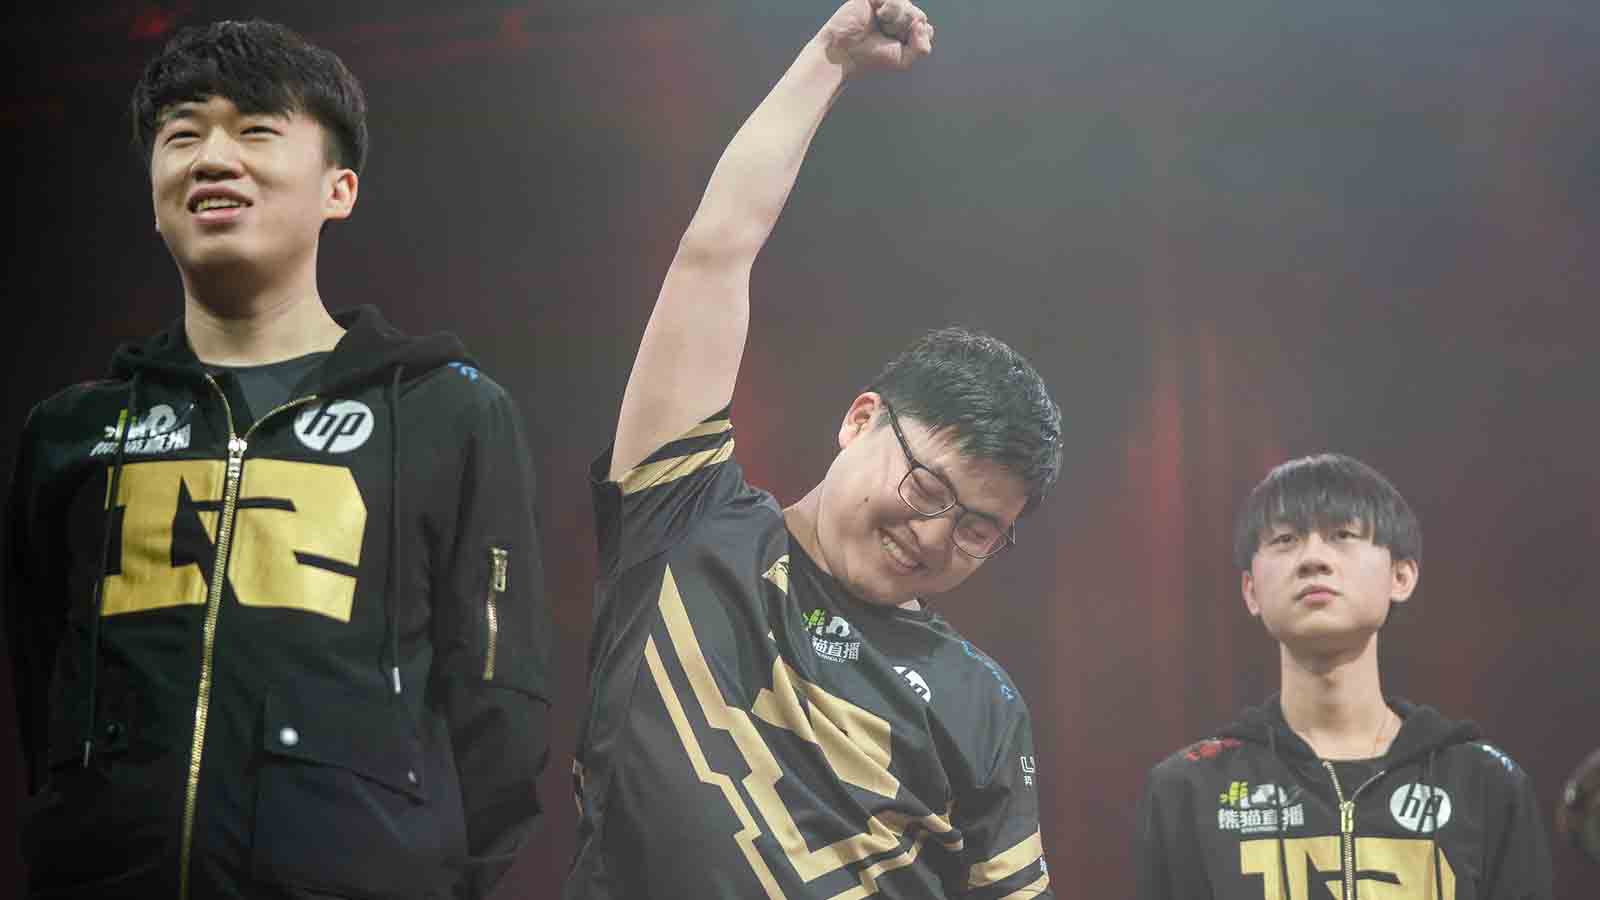 The top 10 greatest LPL players of all time have been determined by votes - ONE Esports